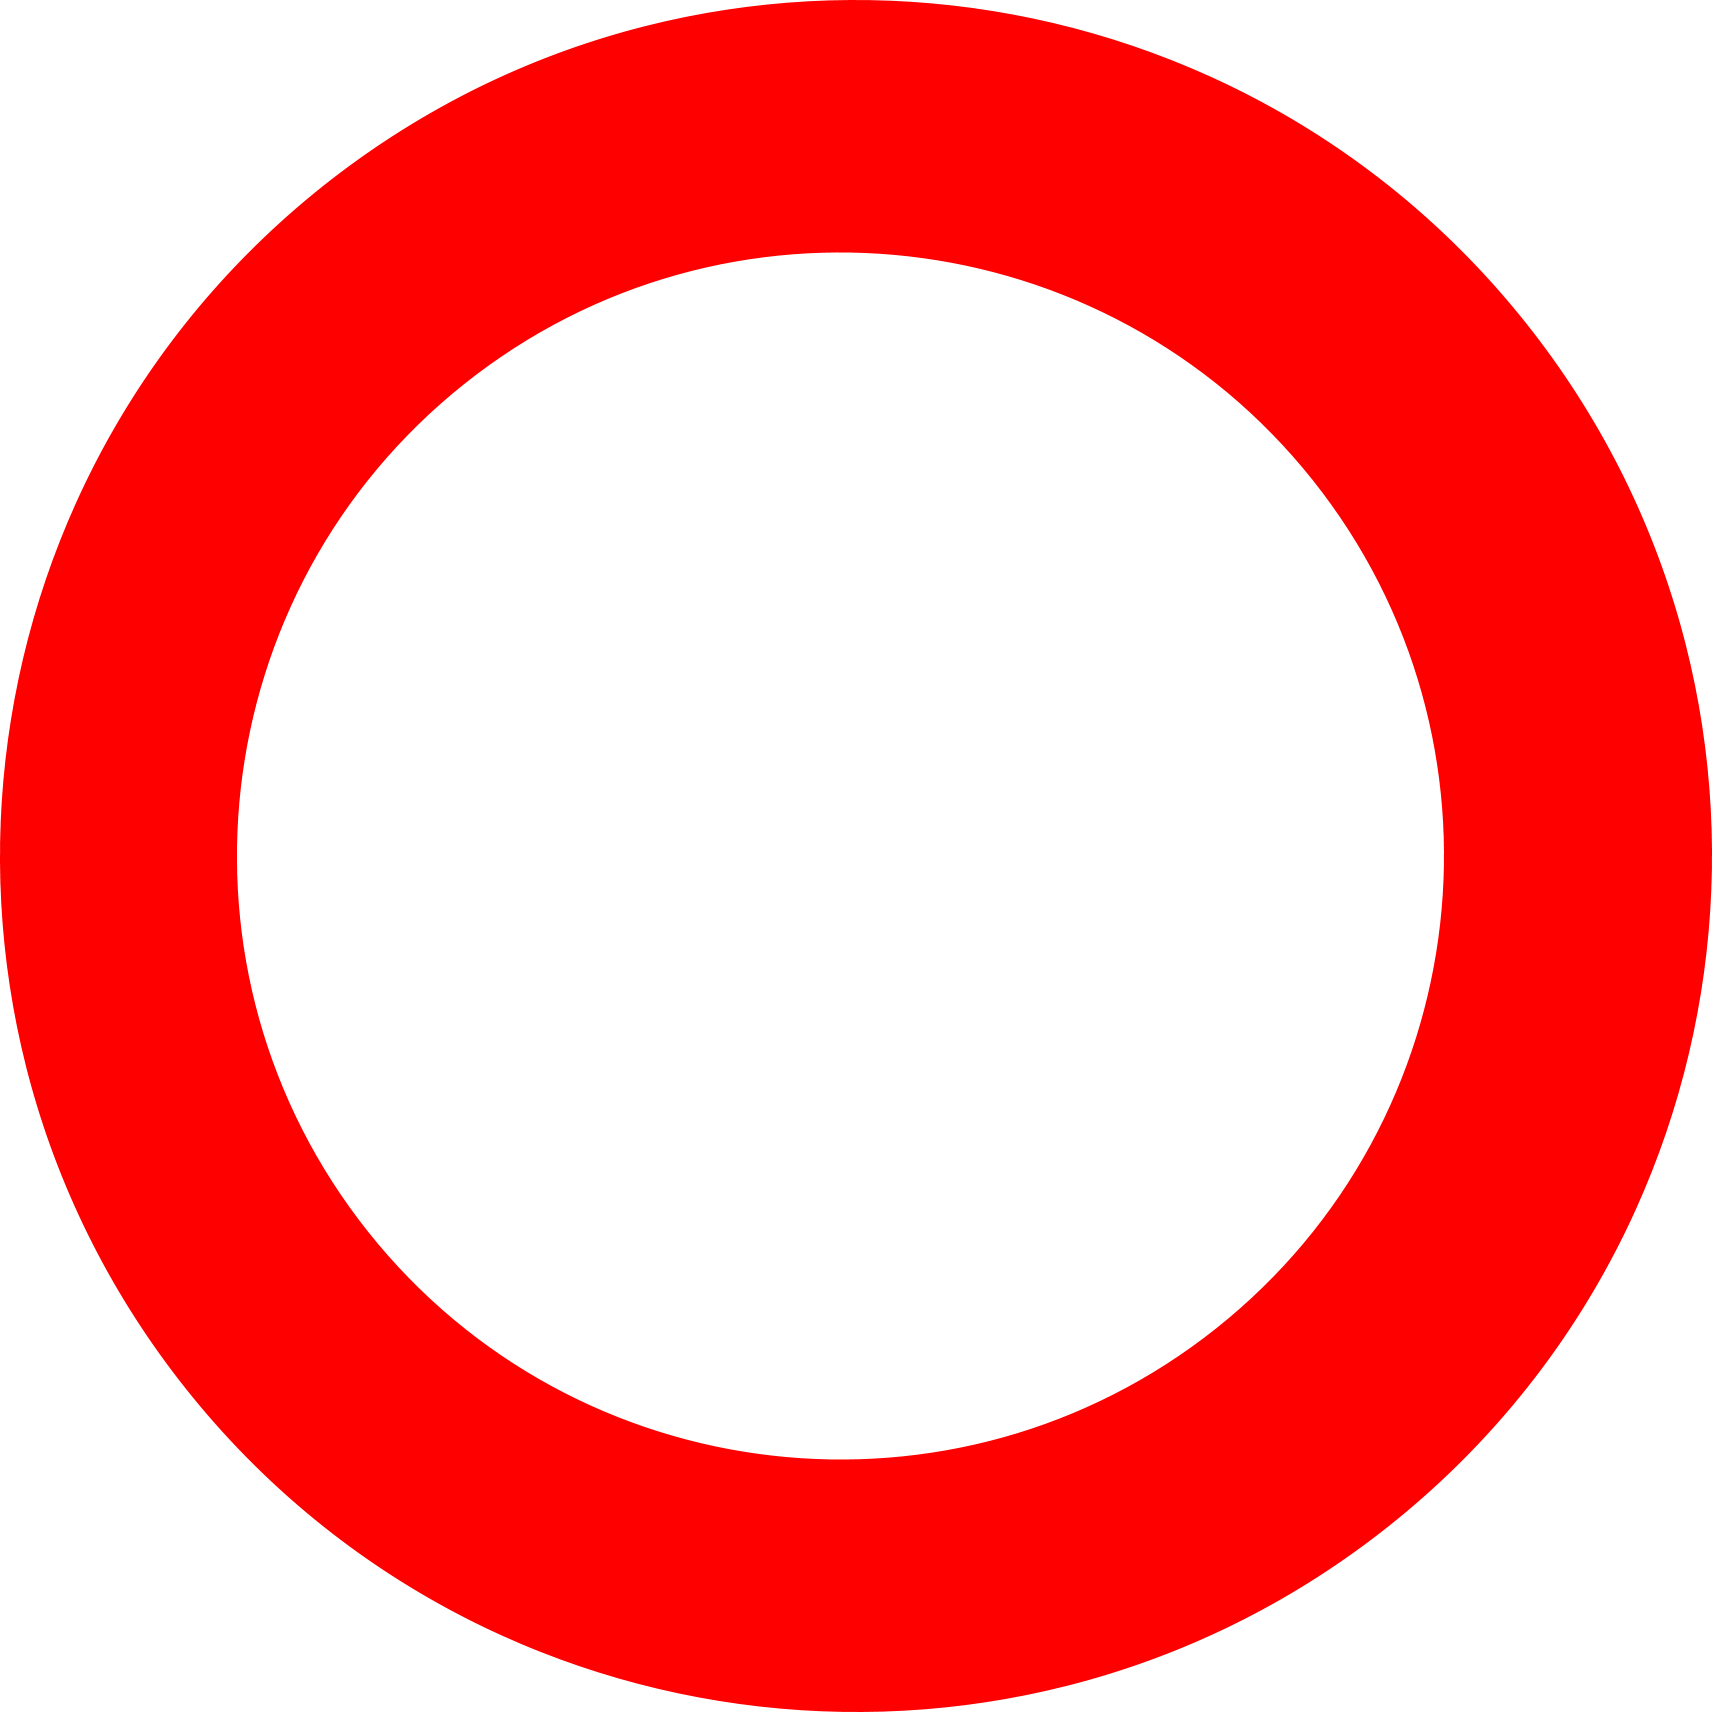 Hollow Red Circle With Thick Border